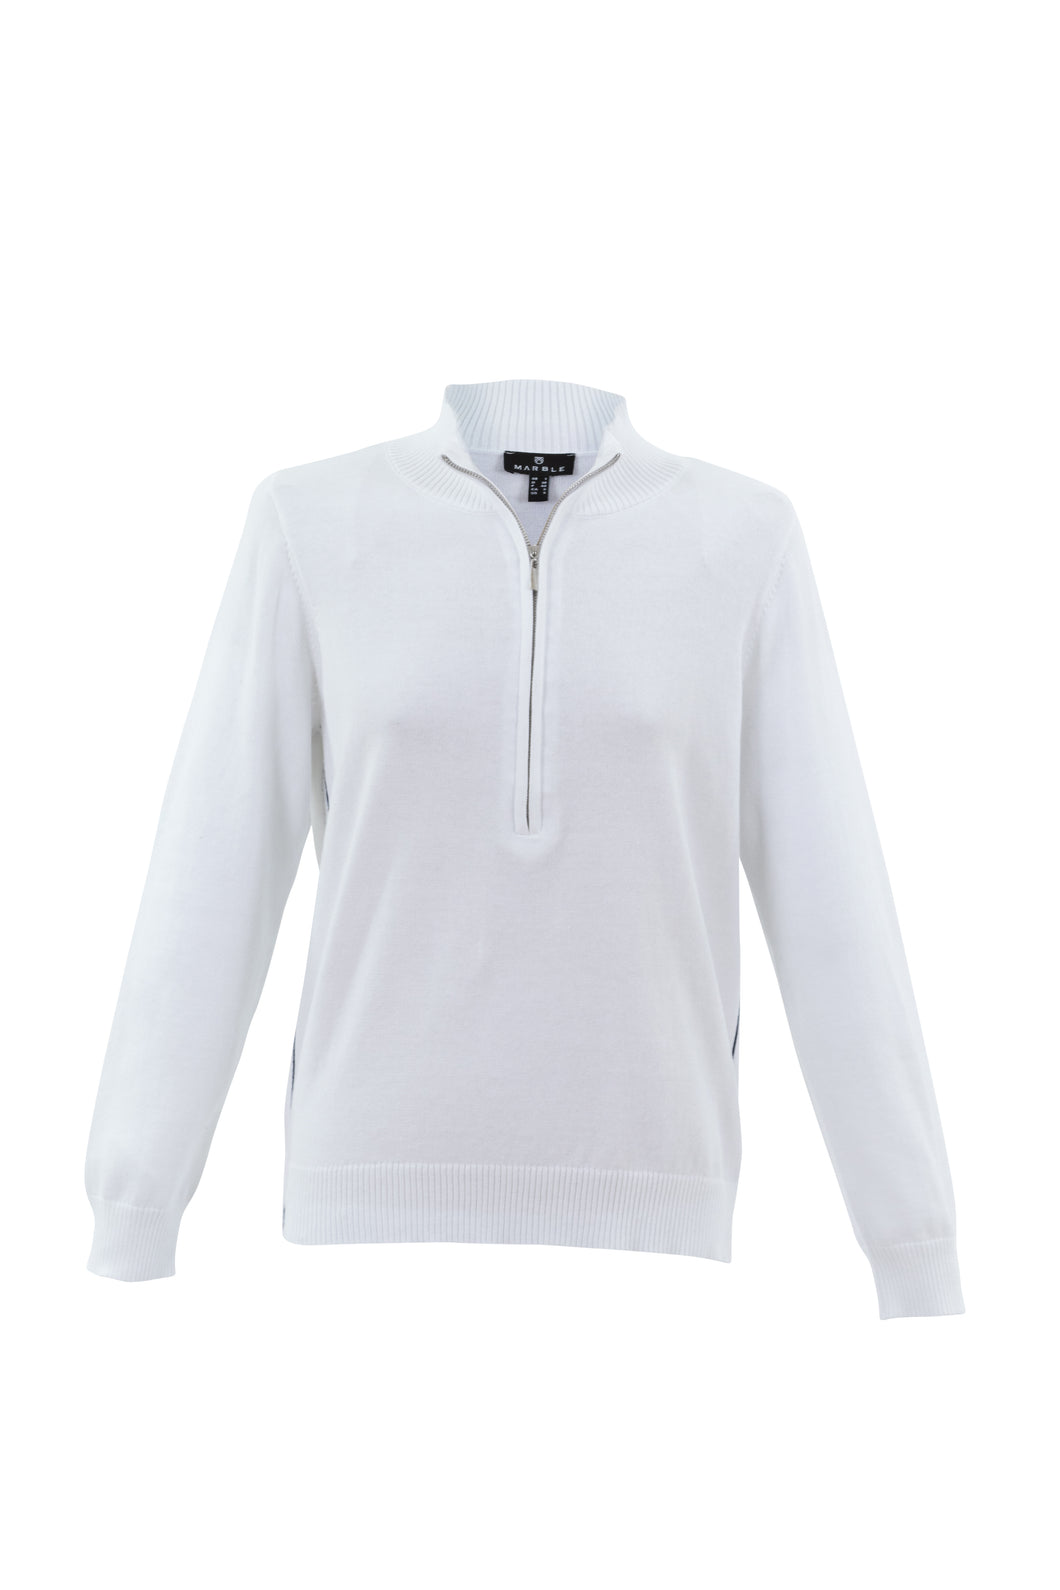 Marble White Half Zip Long Sleeve Relaxed Fit Top - 100% Cotton